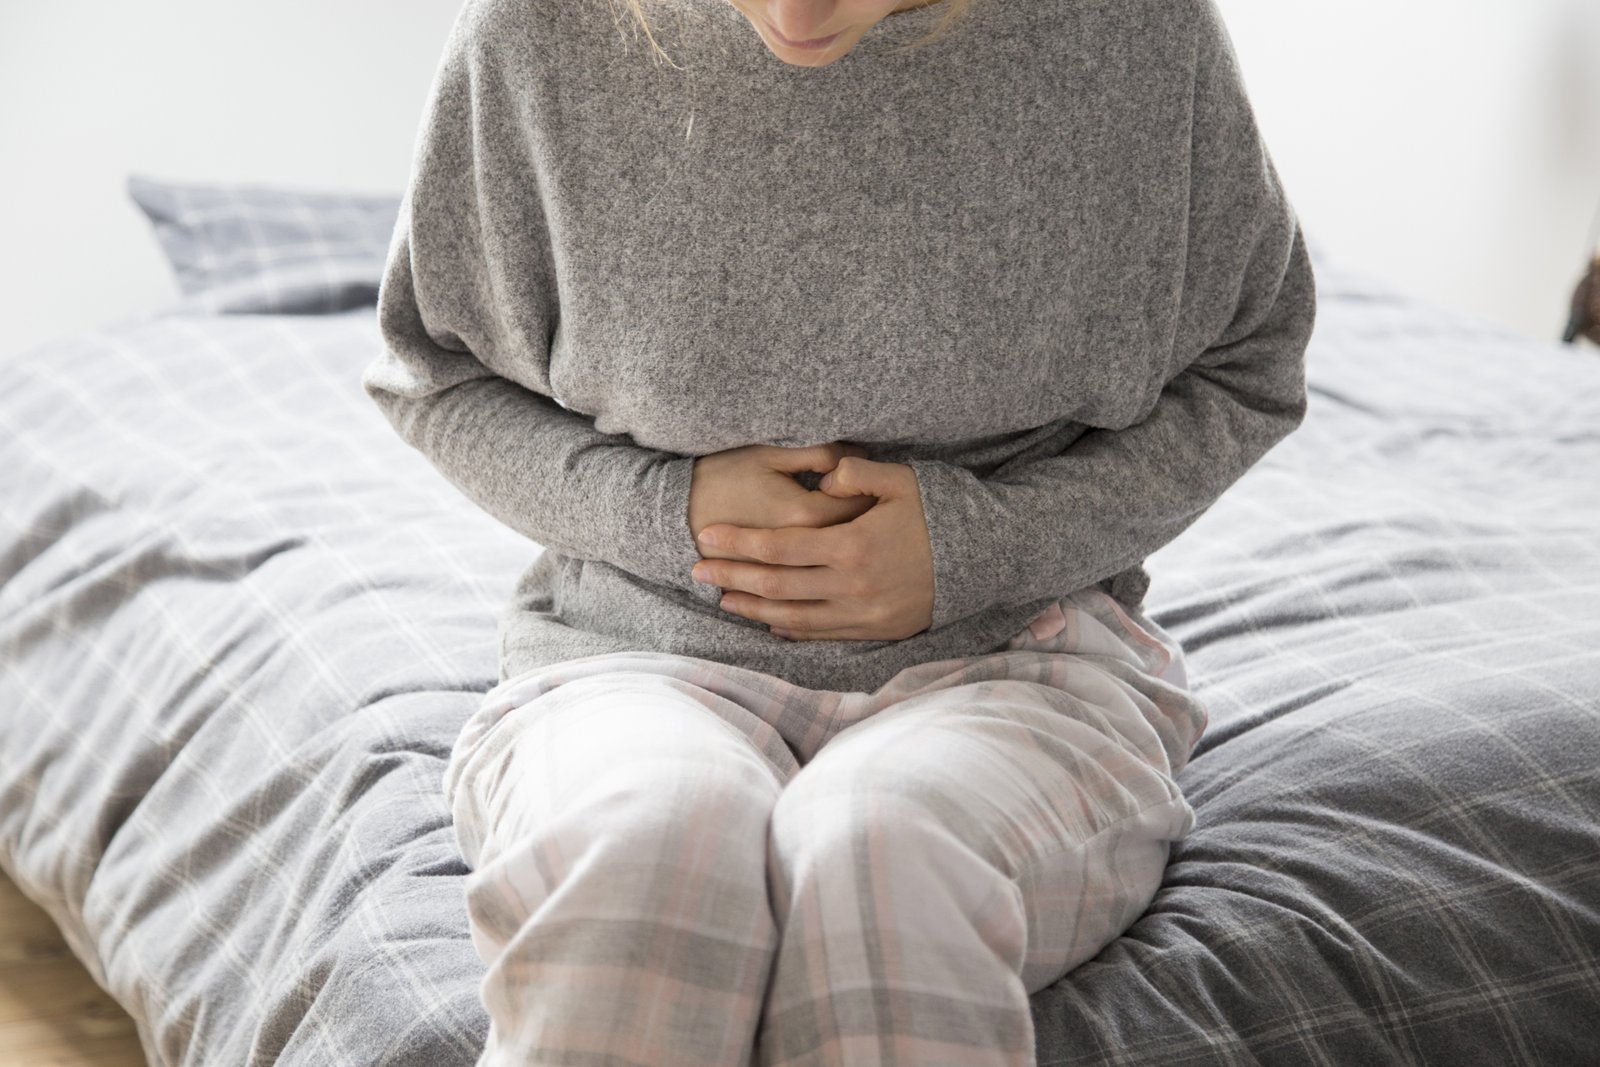 5 Healthy Lifestyle Habits Could Reduce Risk Of Developing Irritable Bowel Syndrome: Study